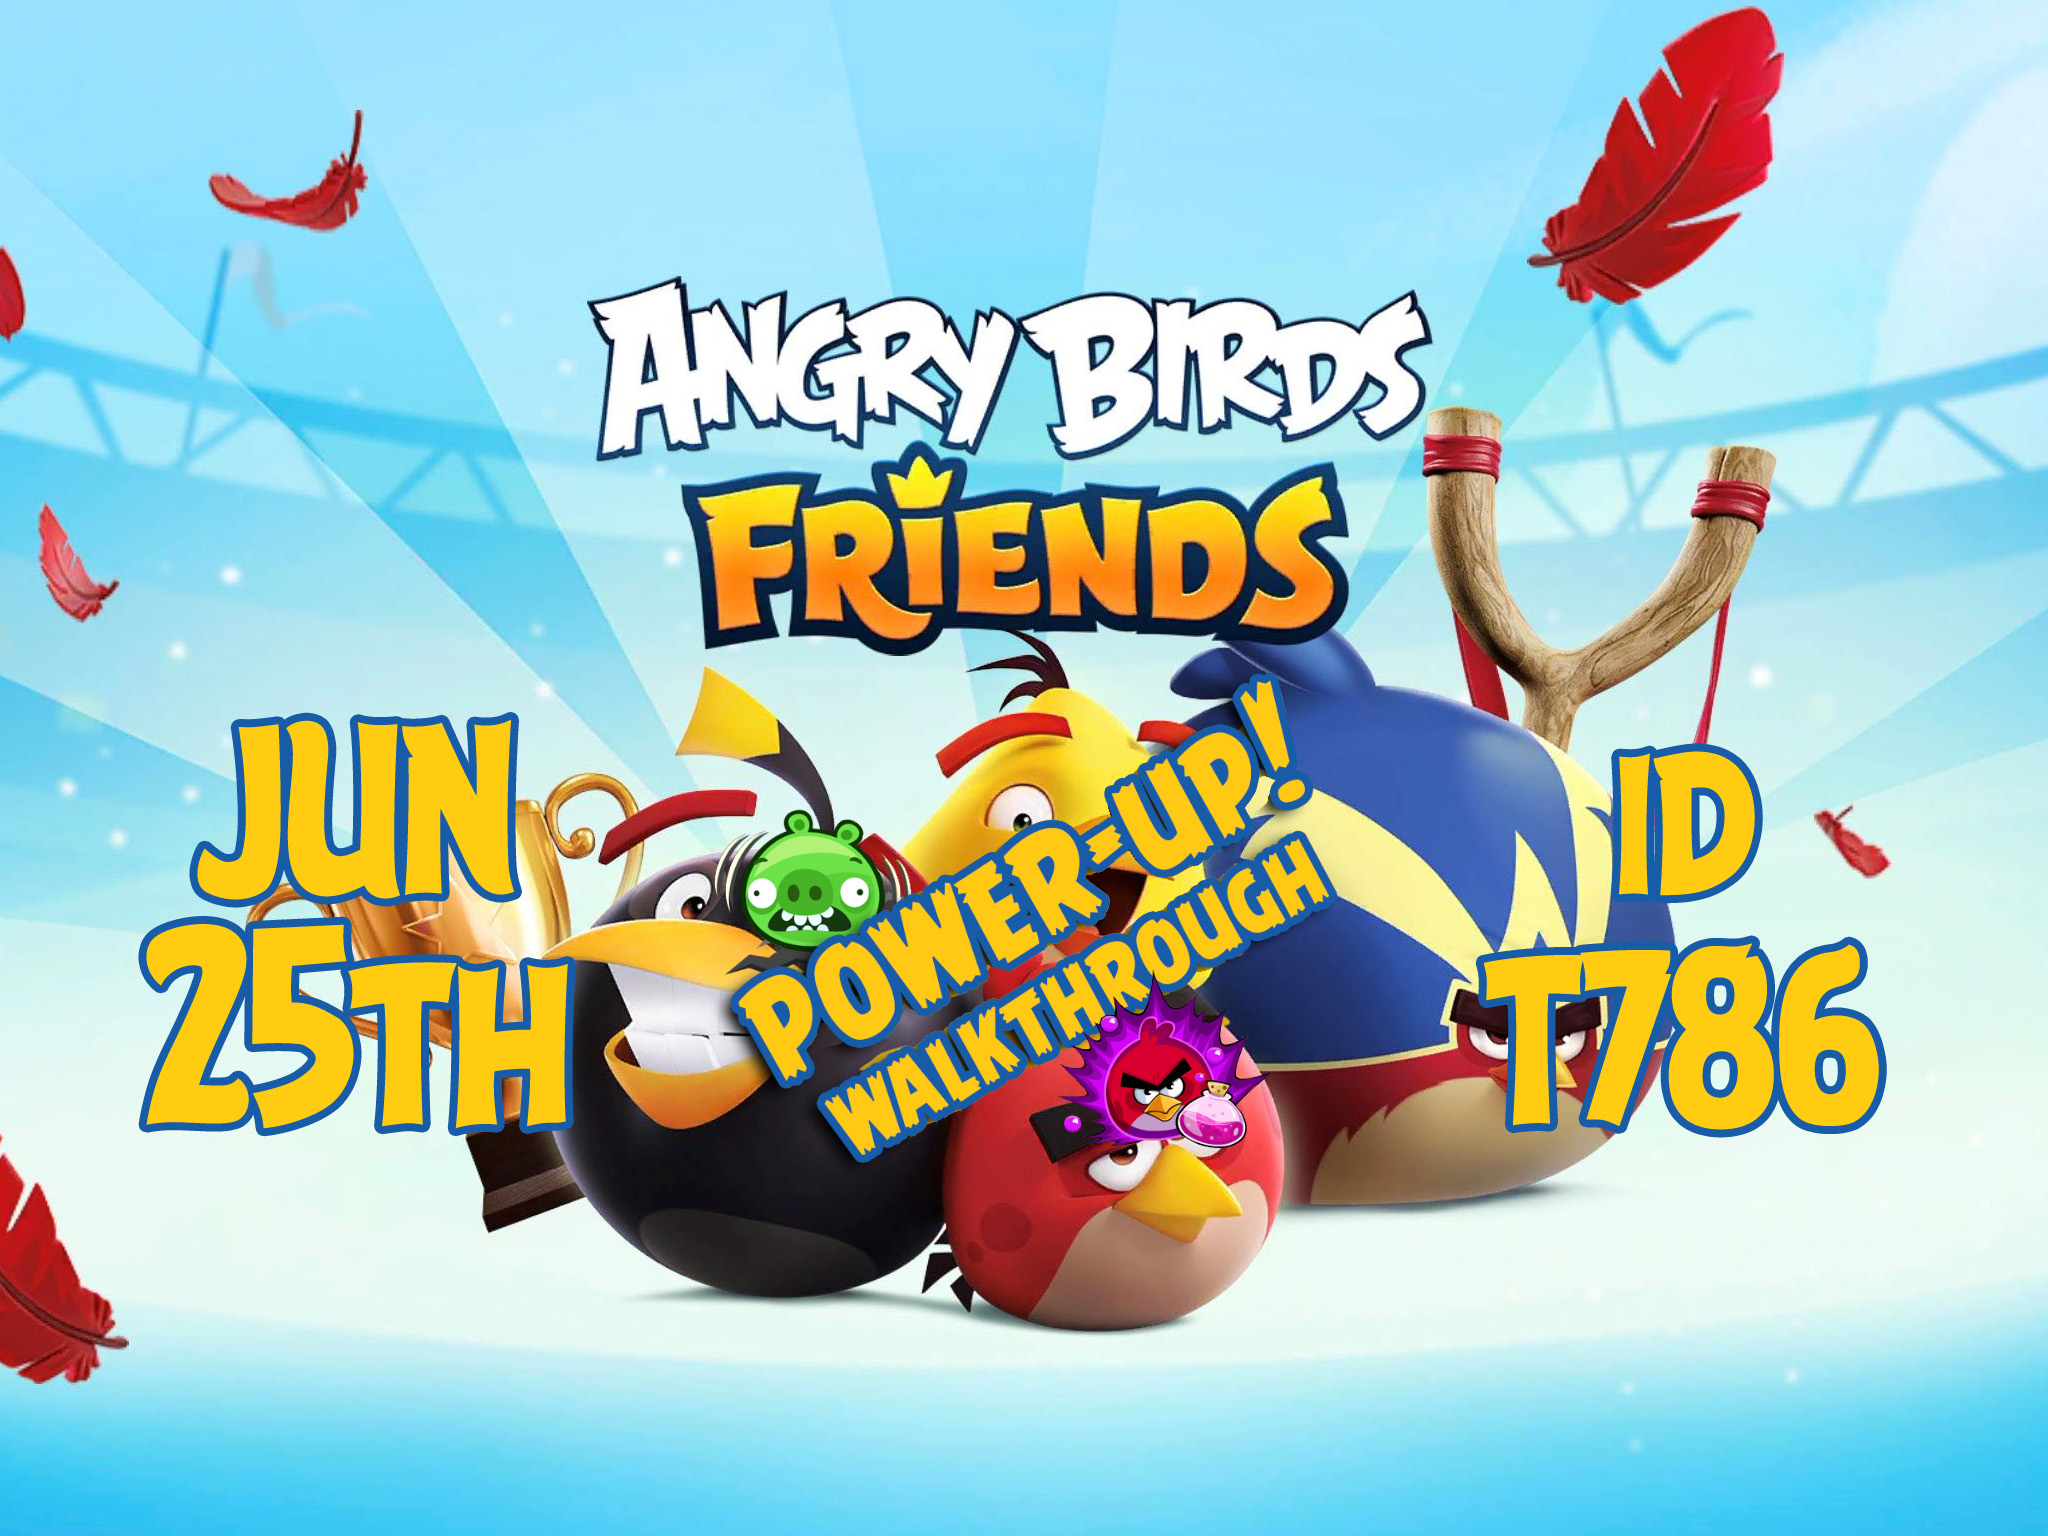 Angry-Birds-Friends-Tournament-T786-Feature-Image-PU